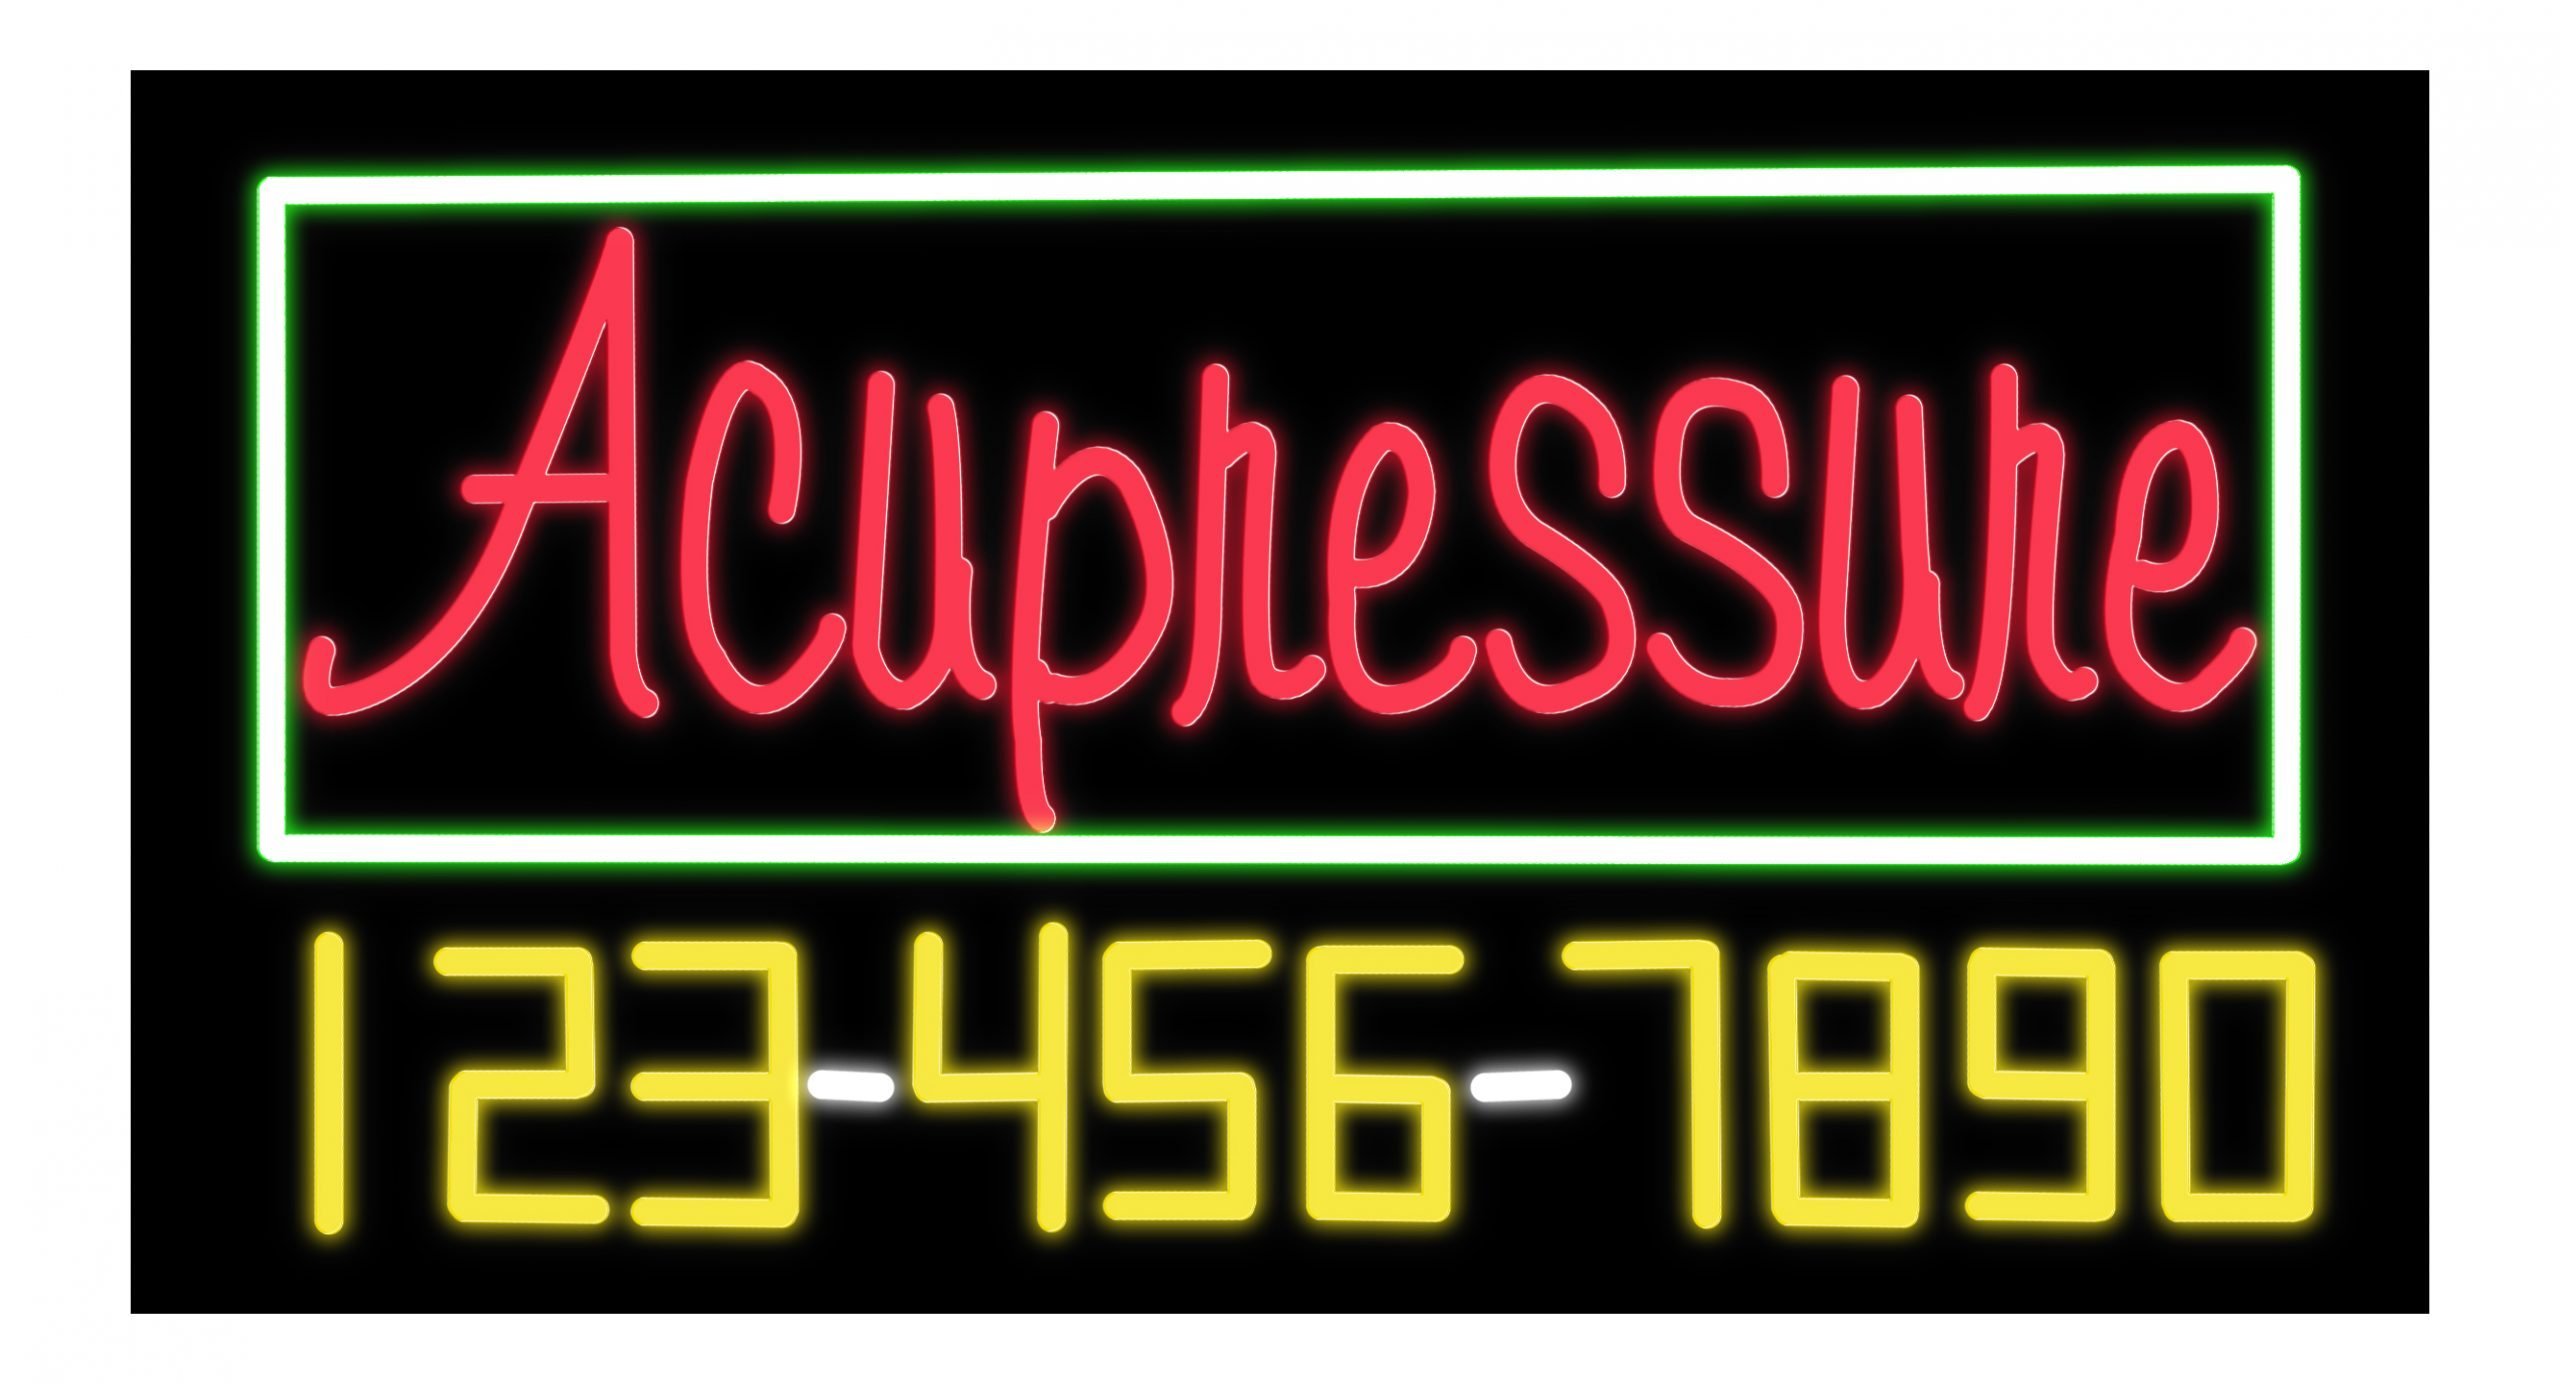 Image of 15037 acupressure with telephone number green border neon sign